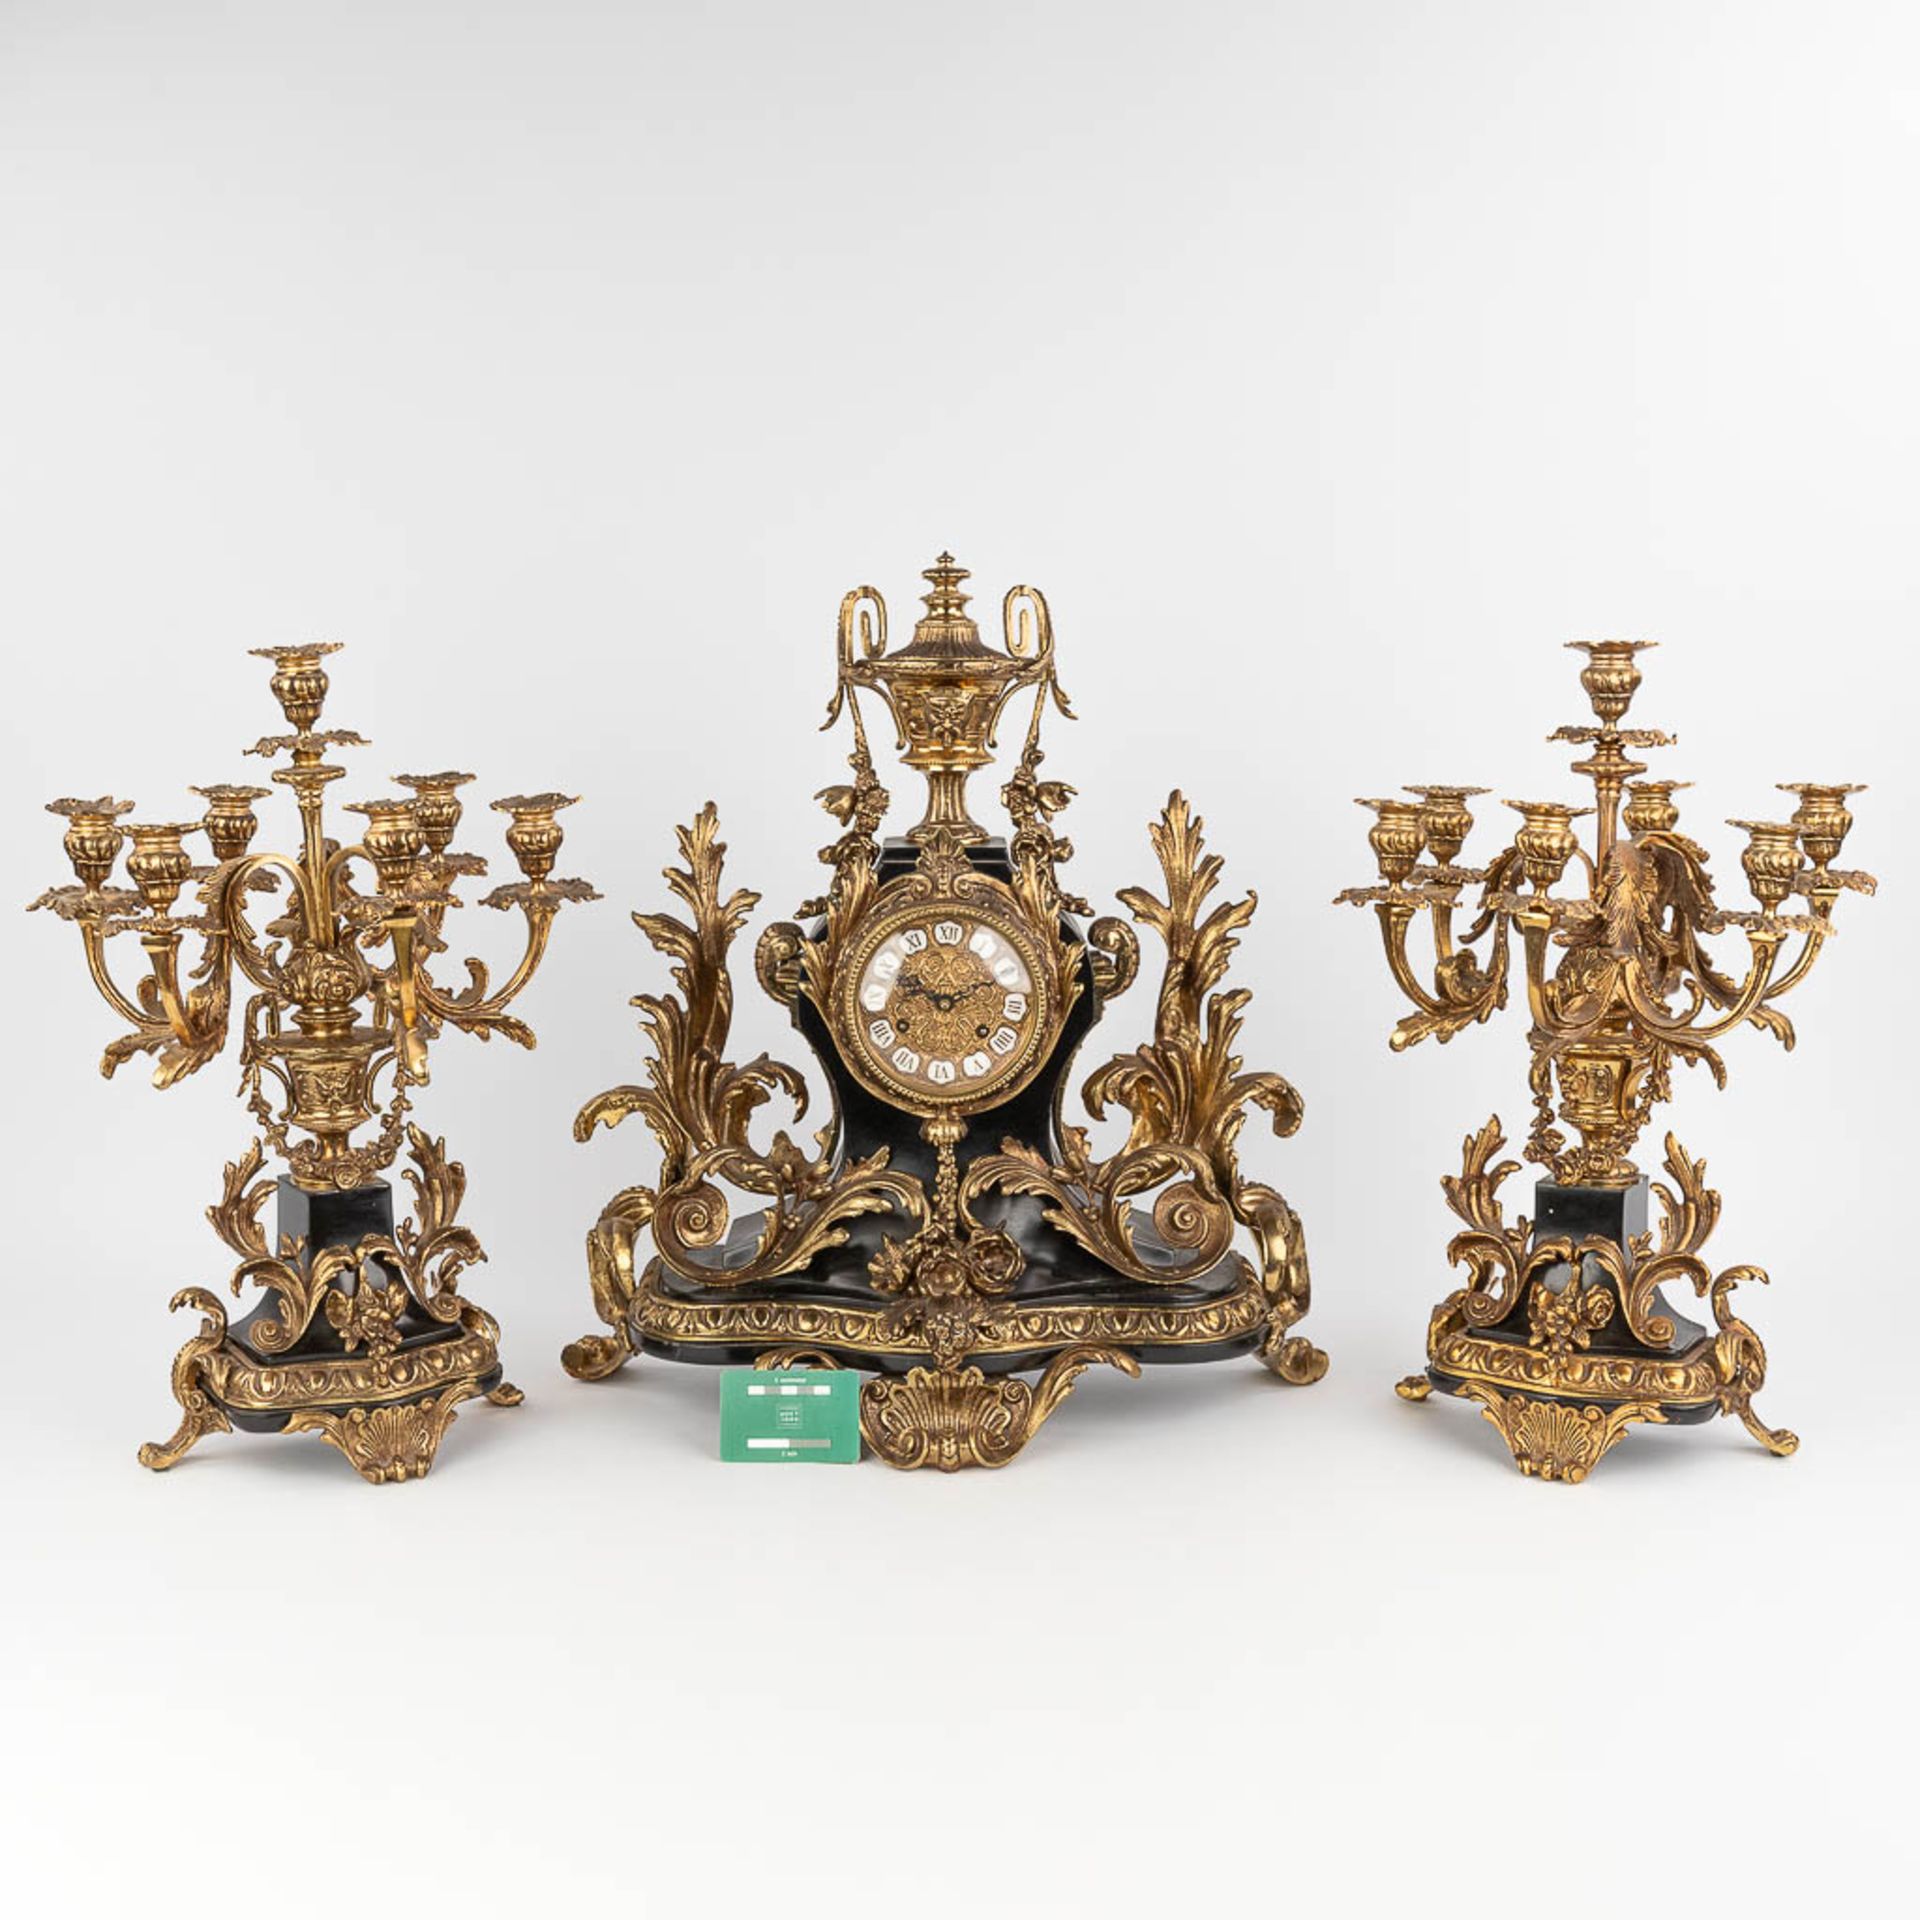 A three-piece mantle garniture clock and candelabra, Louis XV style. Circa 1970. (D:25 x W:51 x H:55 - Image 2 of 14